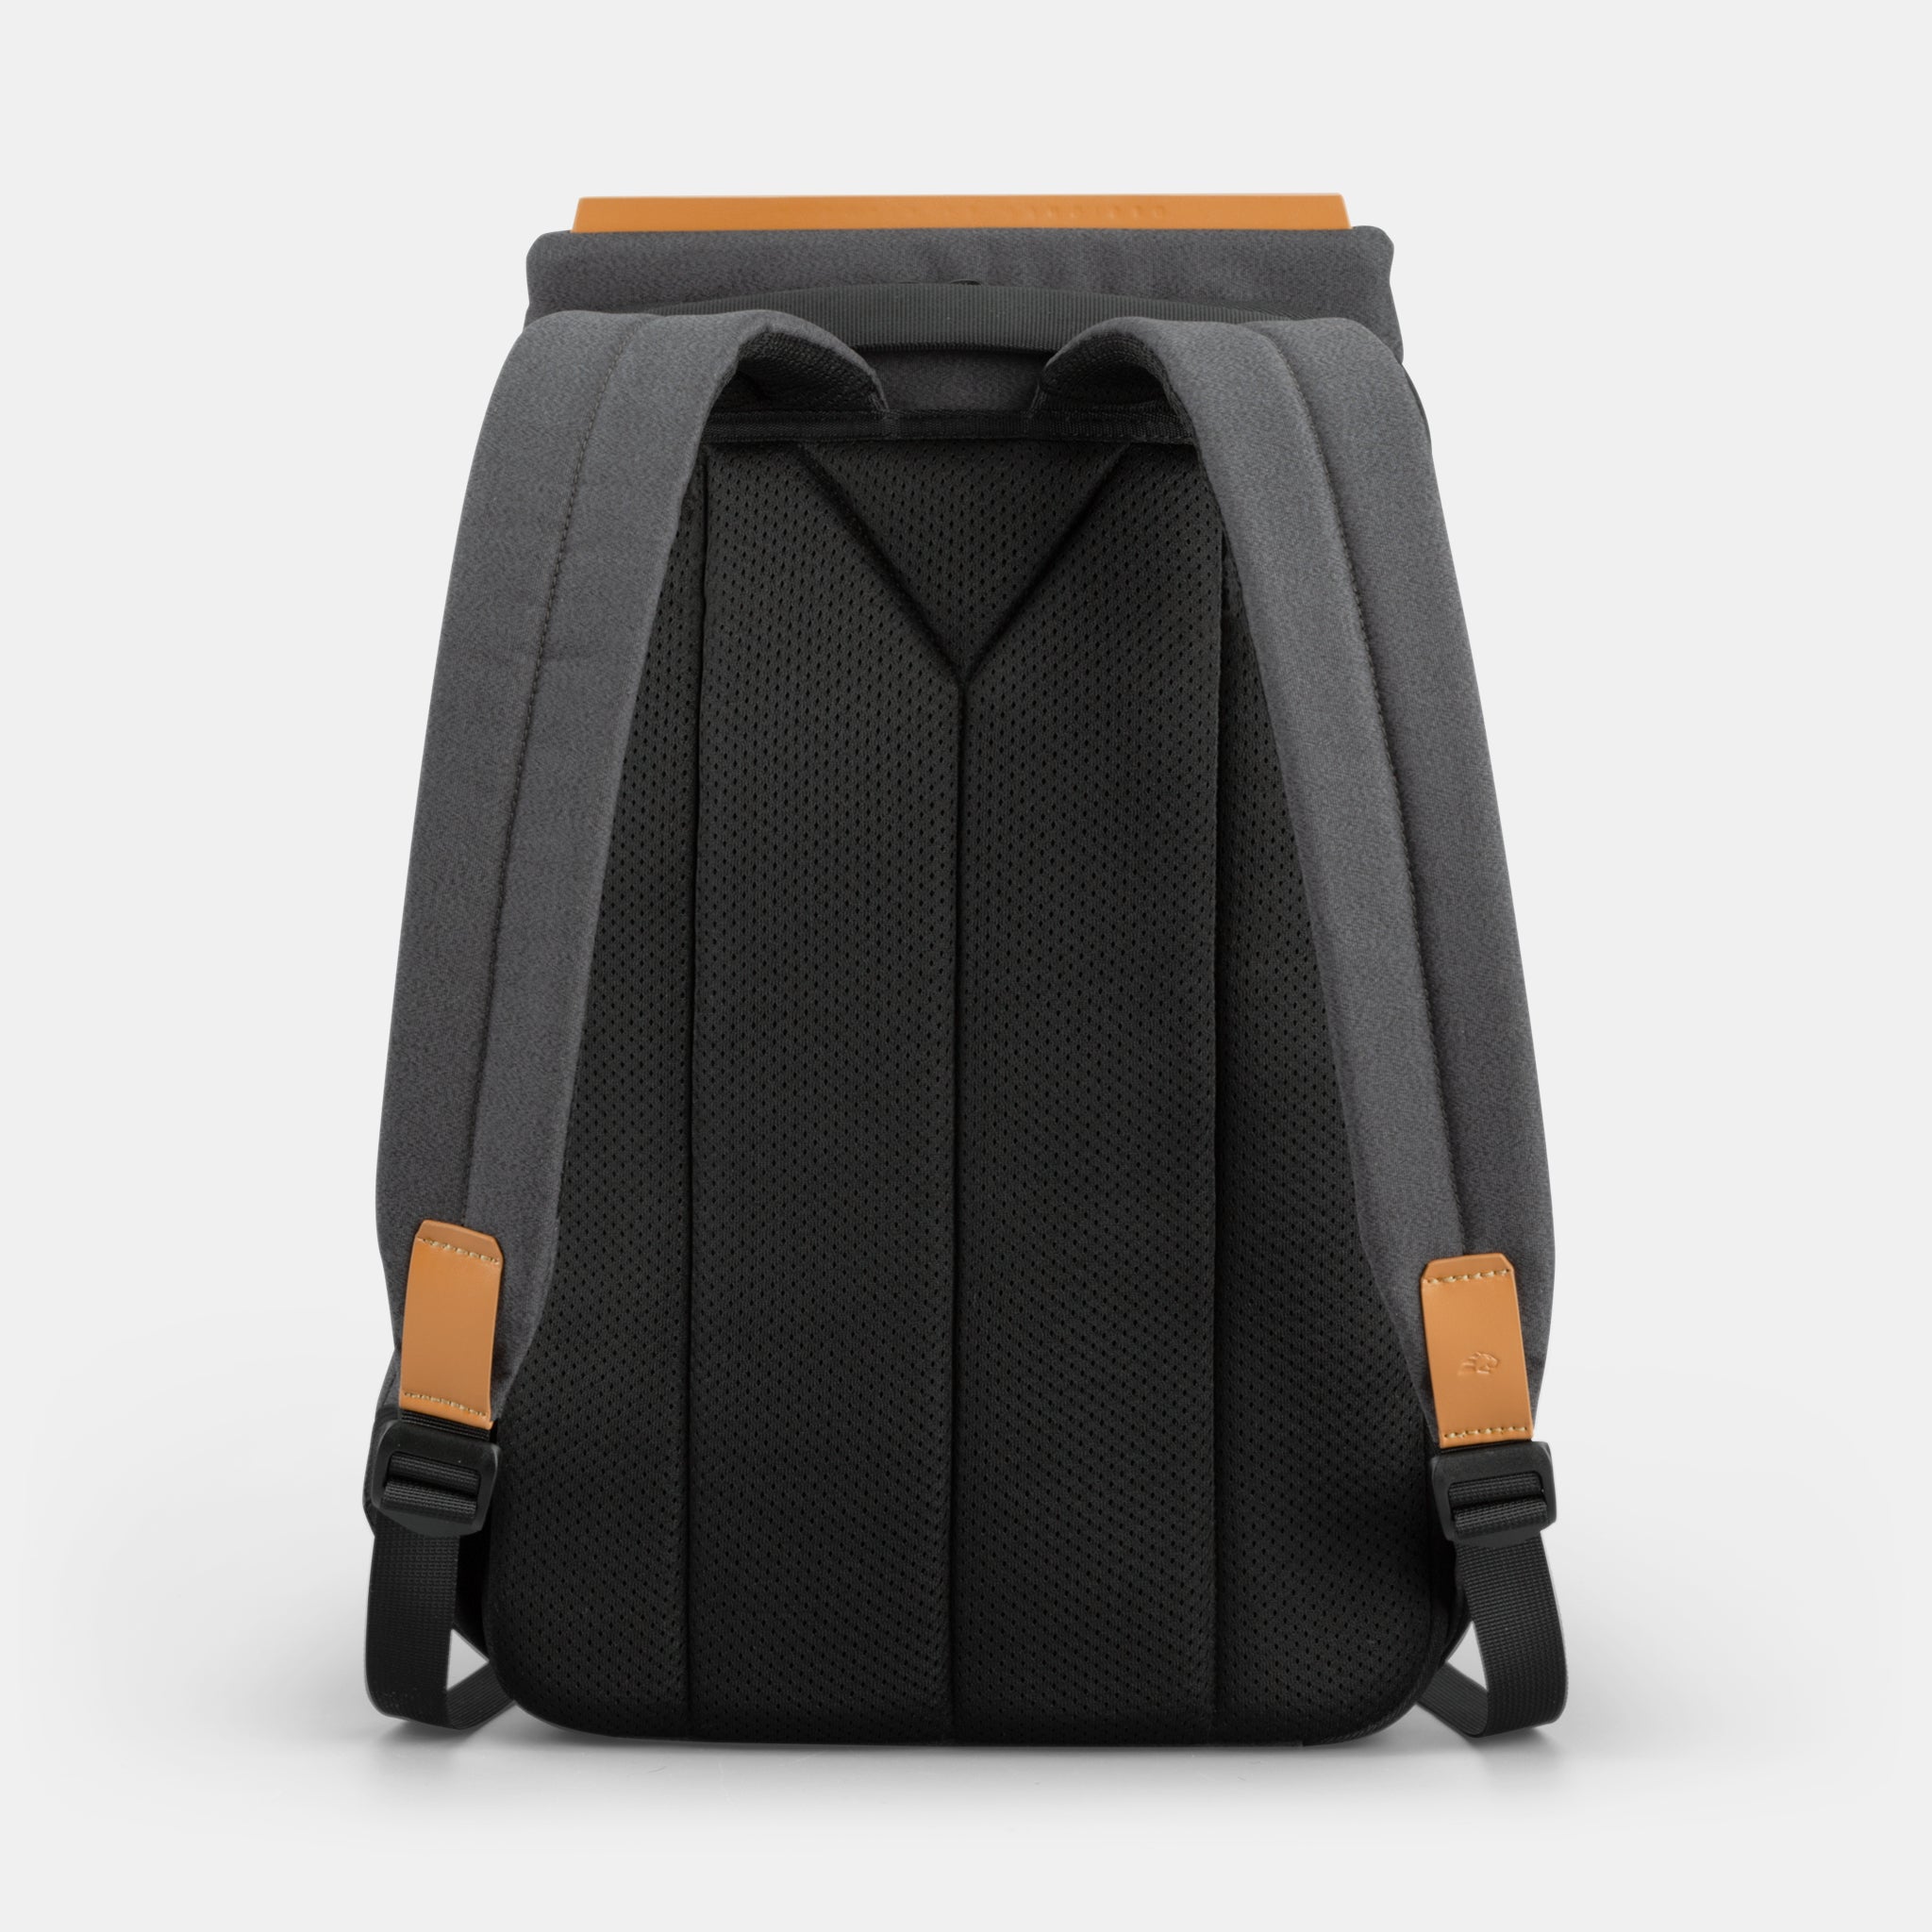 SIMPLE ANTI-THEFT BACKPACK